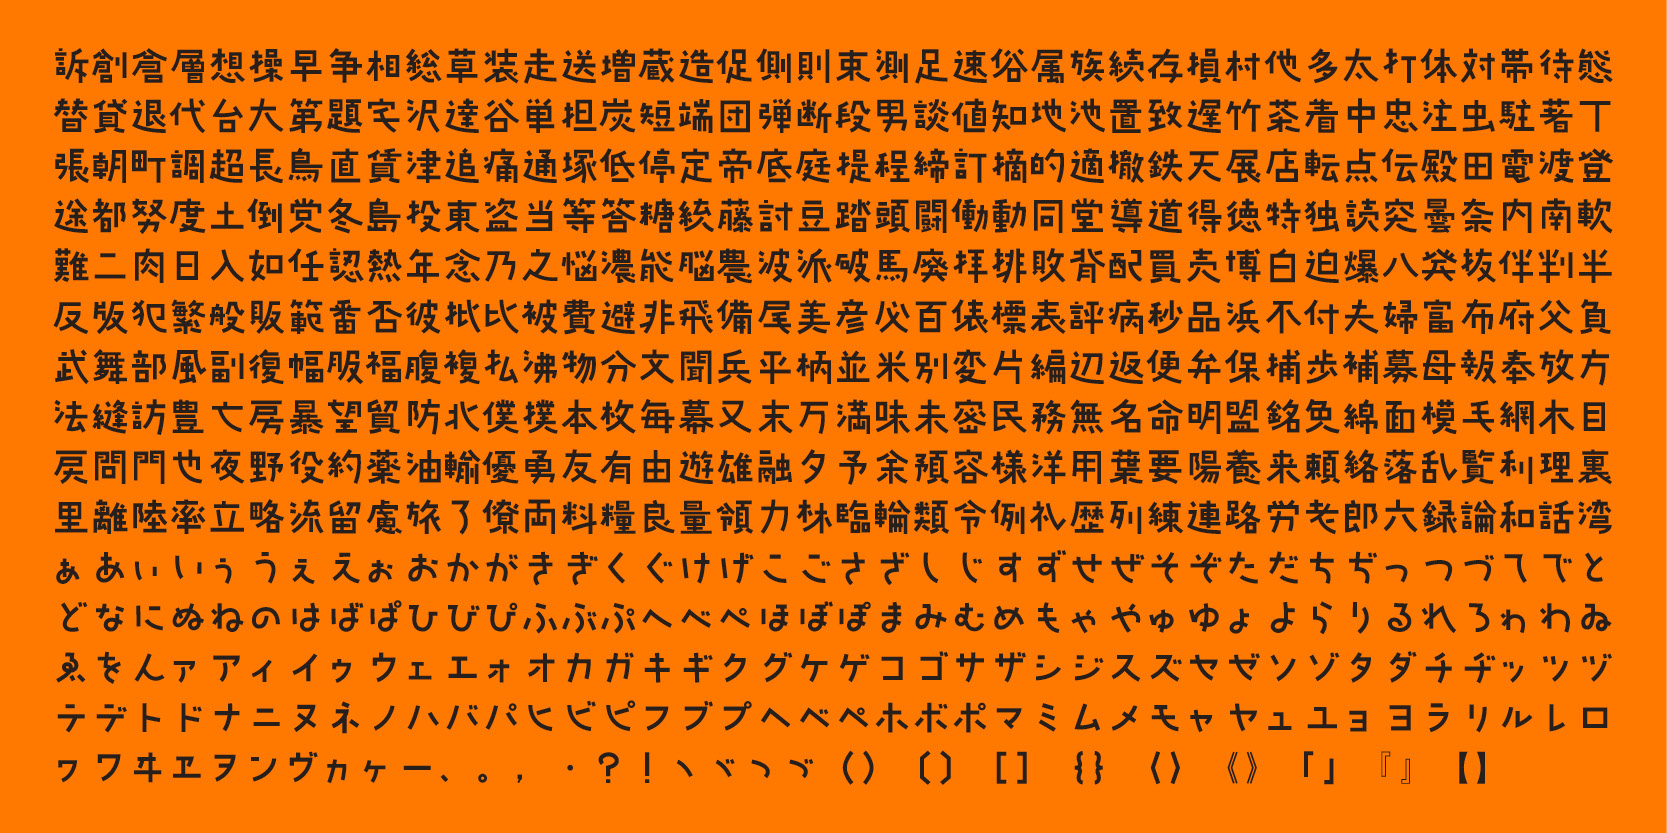 Card displaying AB Hanamaki typeface in various styles